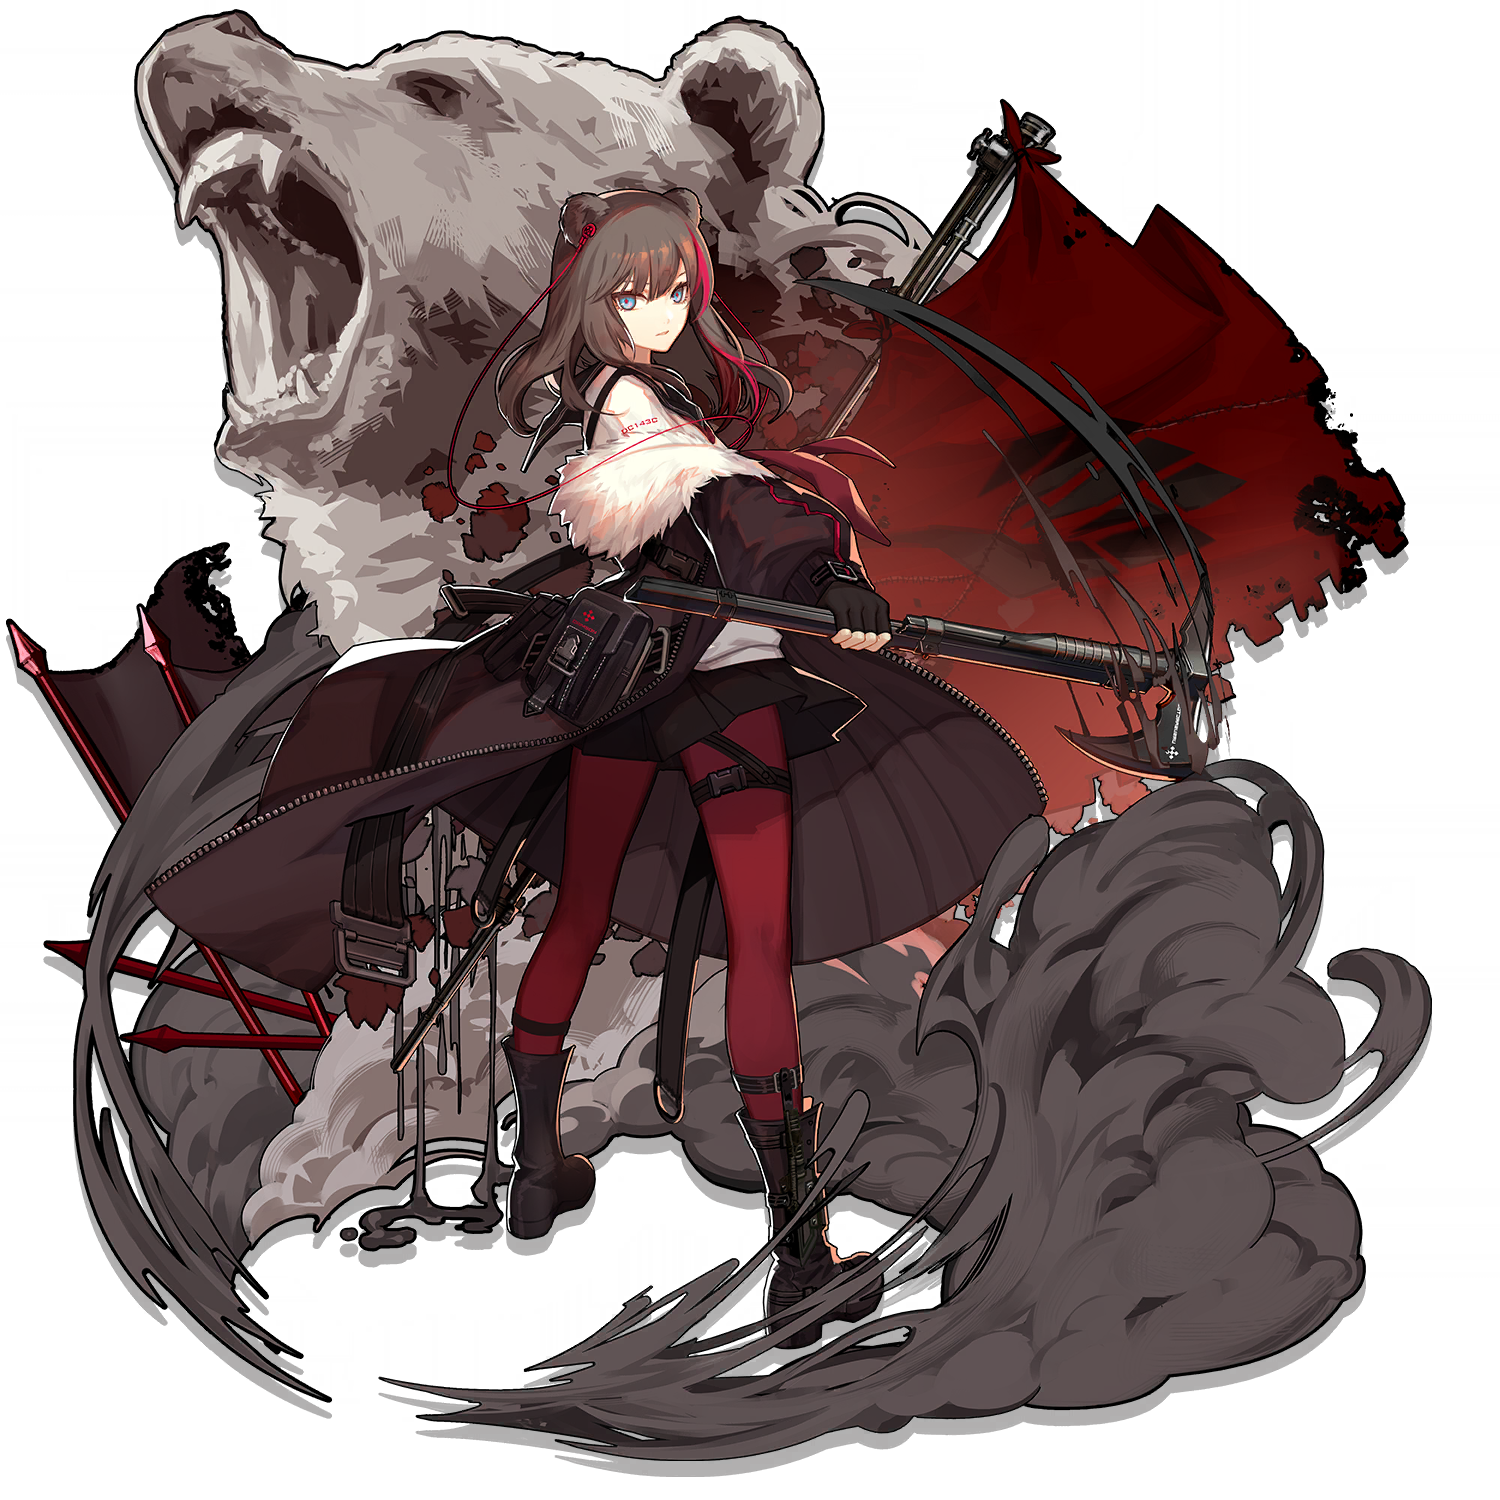 Pack 凛冬 skin 0 2.png